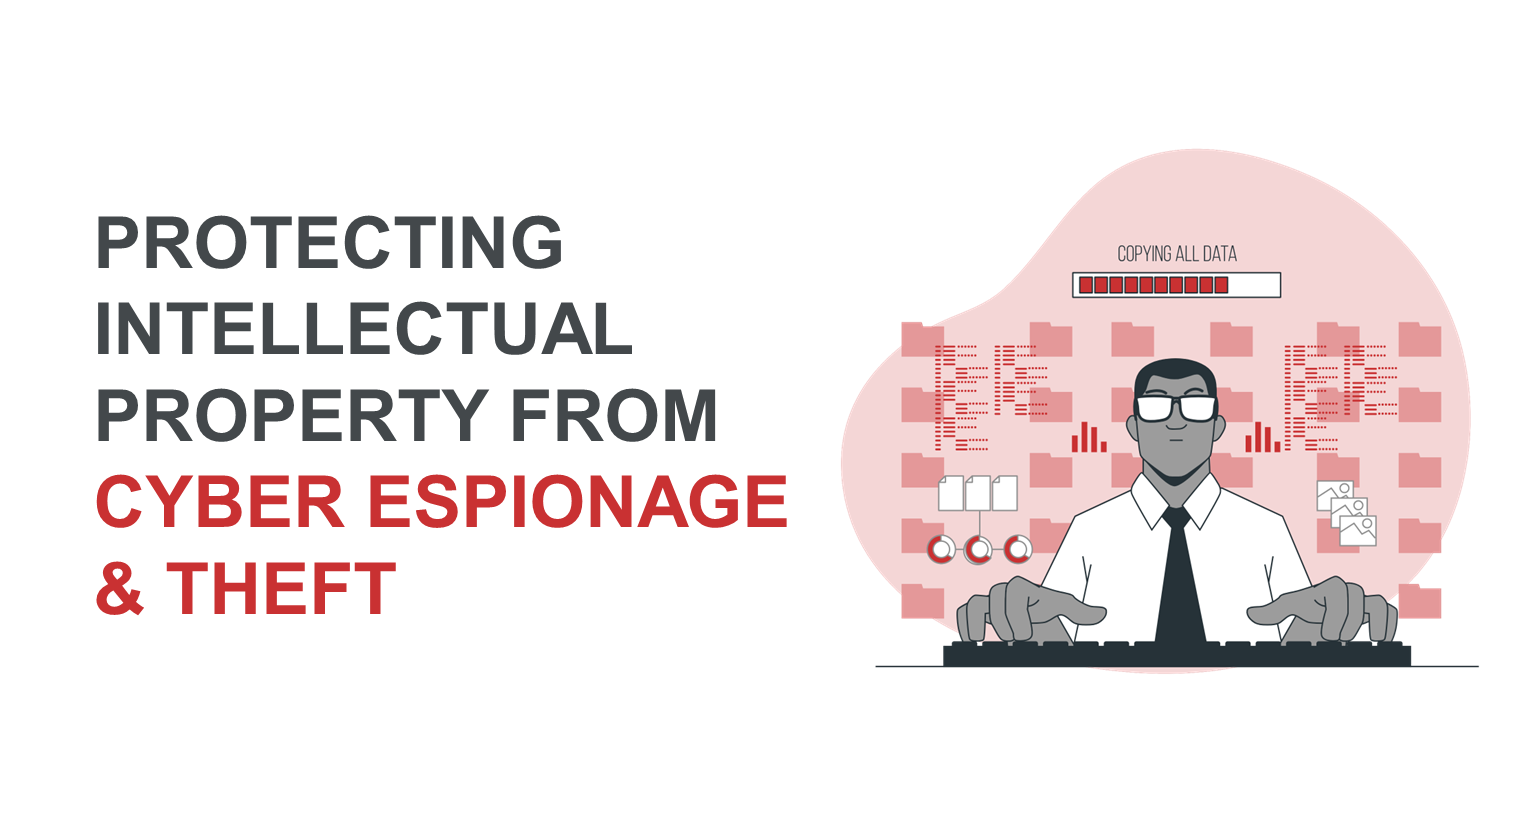 Protecting Intellectual Property from Cyber Espionage and Theft